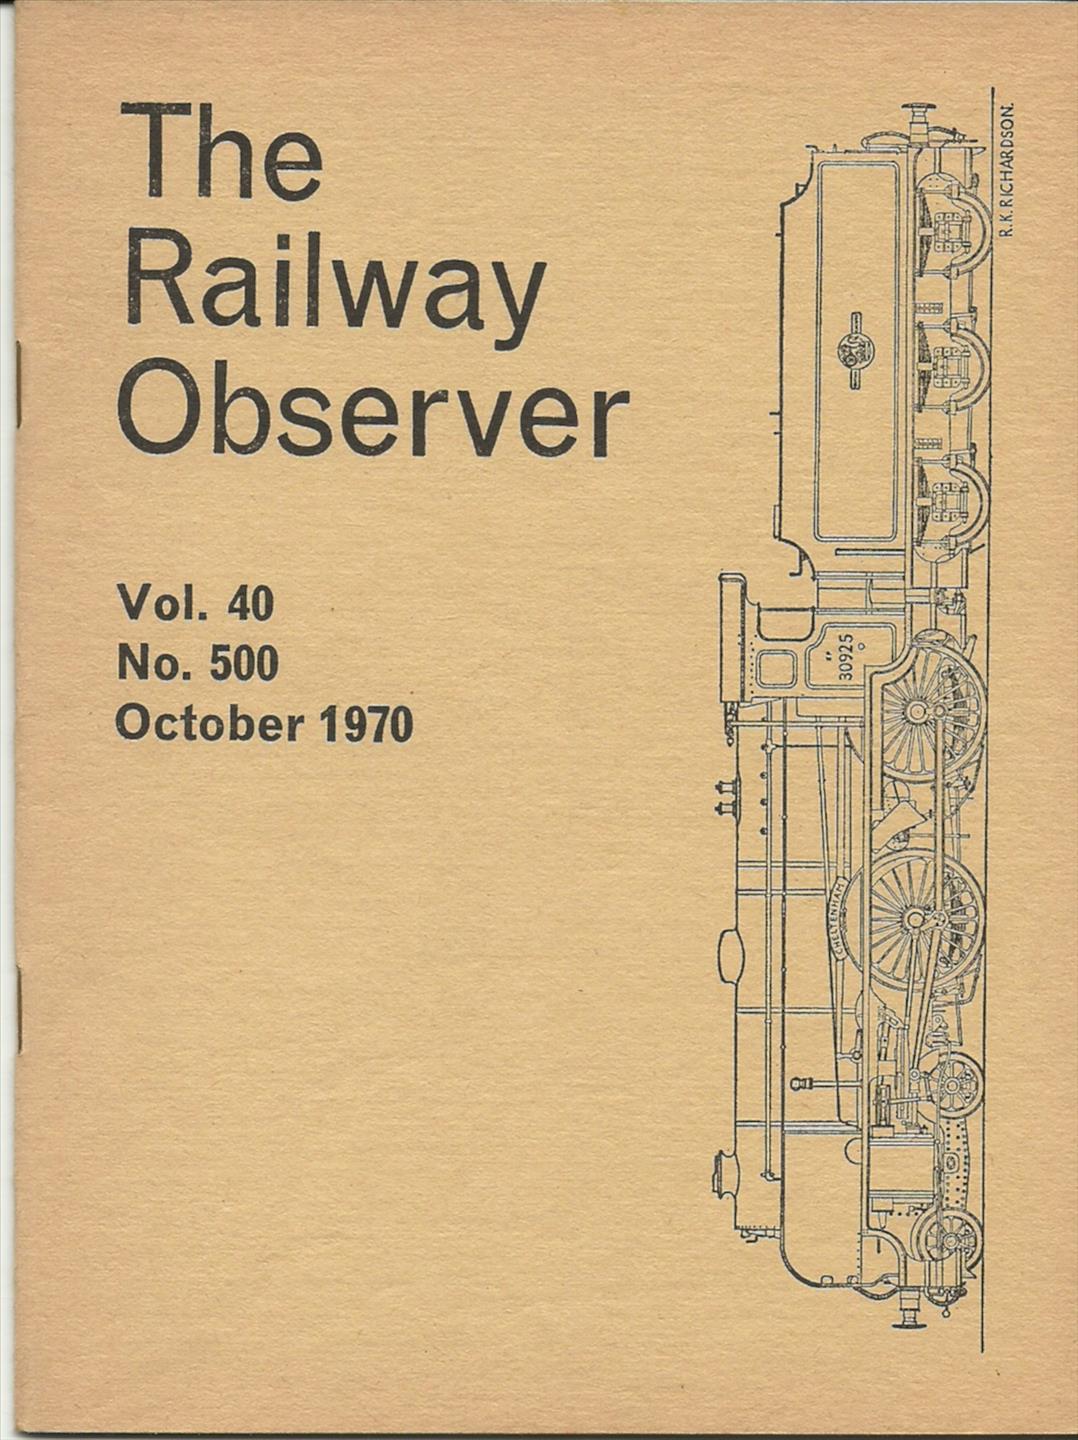 In January 1964 the front cover of RO was "cleaned up", removing lists of society officers and affiliated societies, with the line drawing enlarged and used sideways. The cover of "milestone" issue number 500 was selected as appropriate for this photo gallery since issue number 1000 of RO appeared in 2012. R.K. Richardson